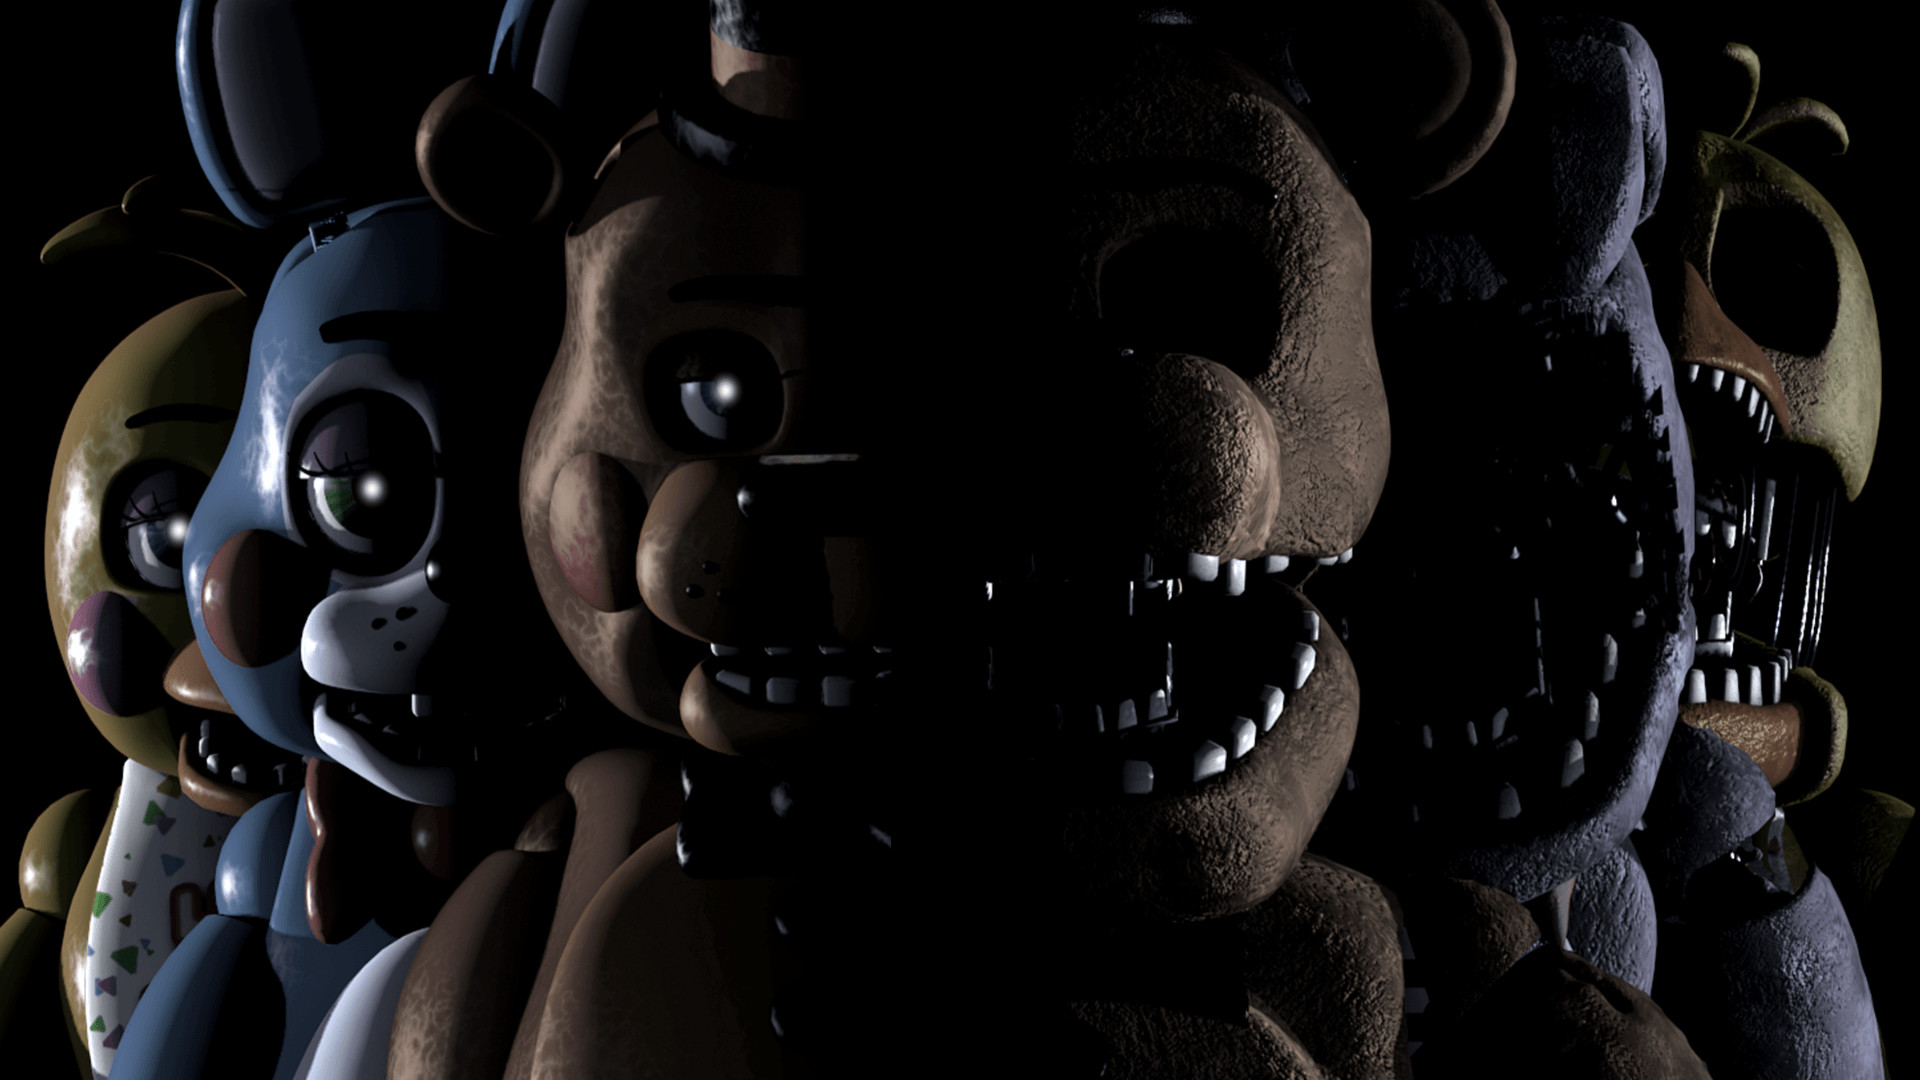 1920x1080 Five Nights at Freddy's Wallpapers - Album on Imgur